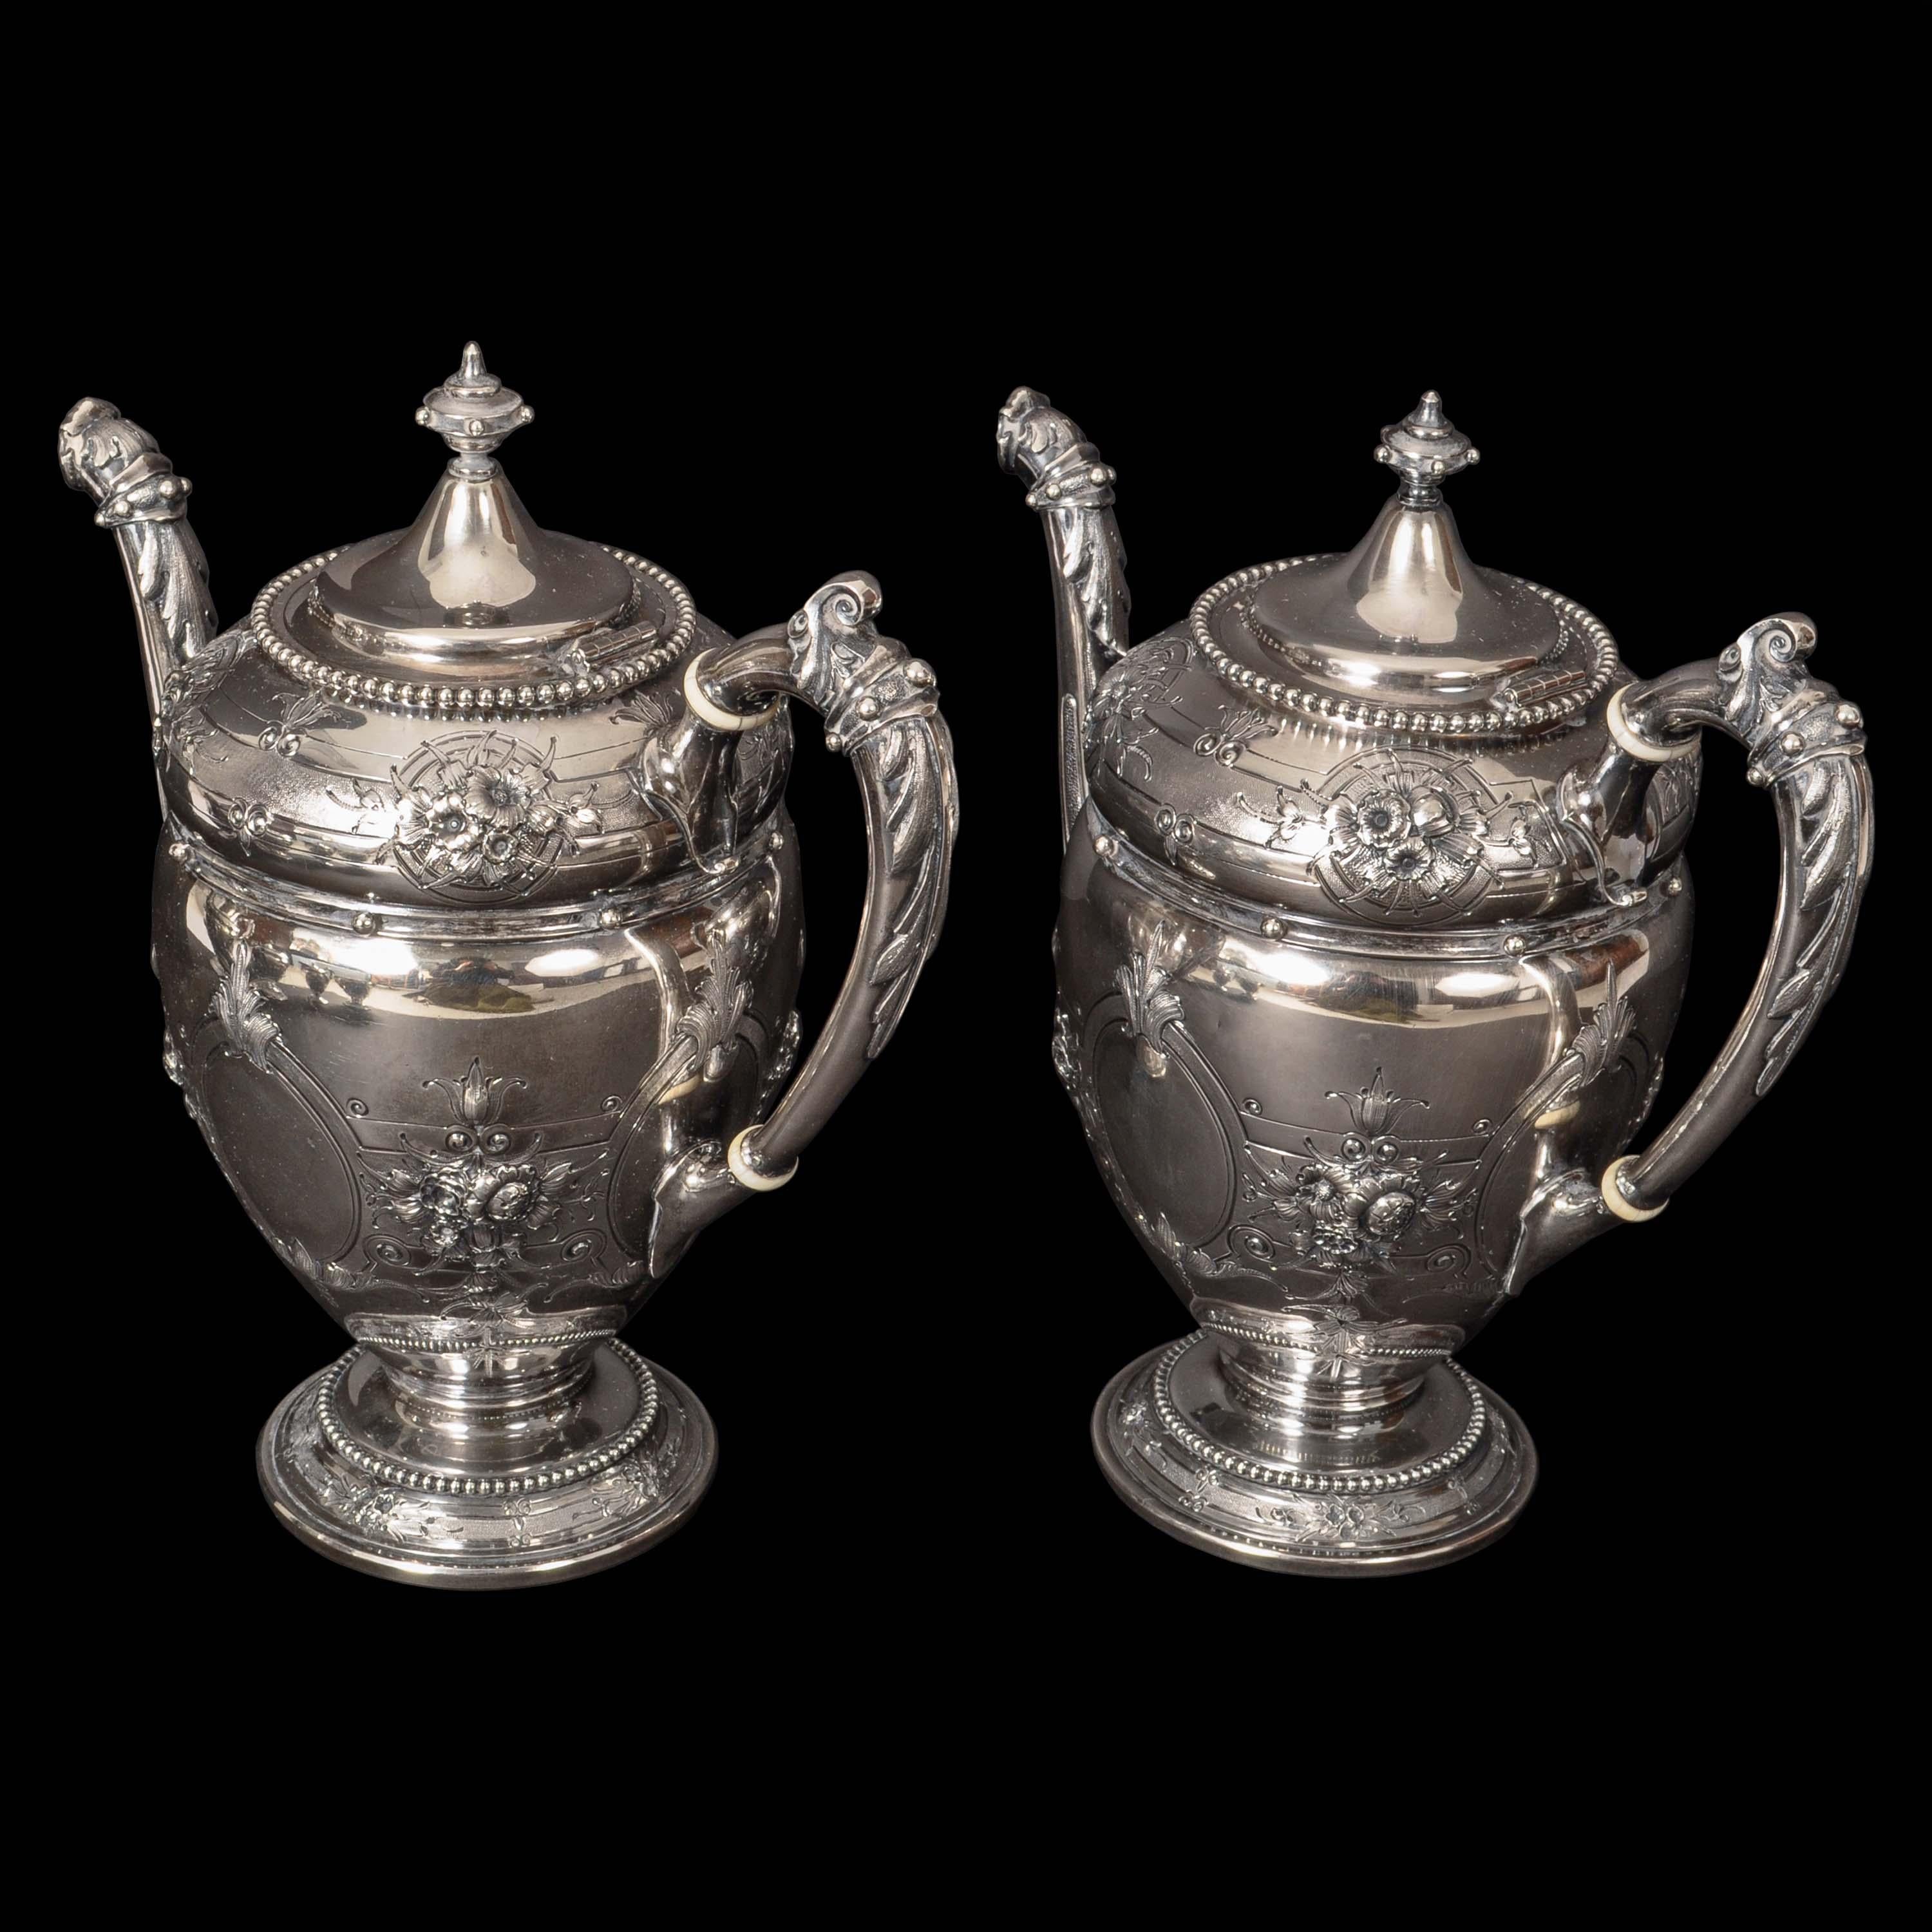 Antique American Gorham Coin Silver Mary Todd Lincoln Tea & Coffee Service, 1861 In Good Condition For Sale In Portland, OR